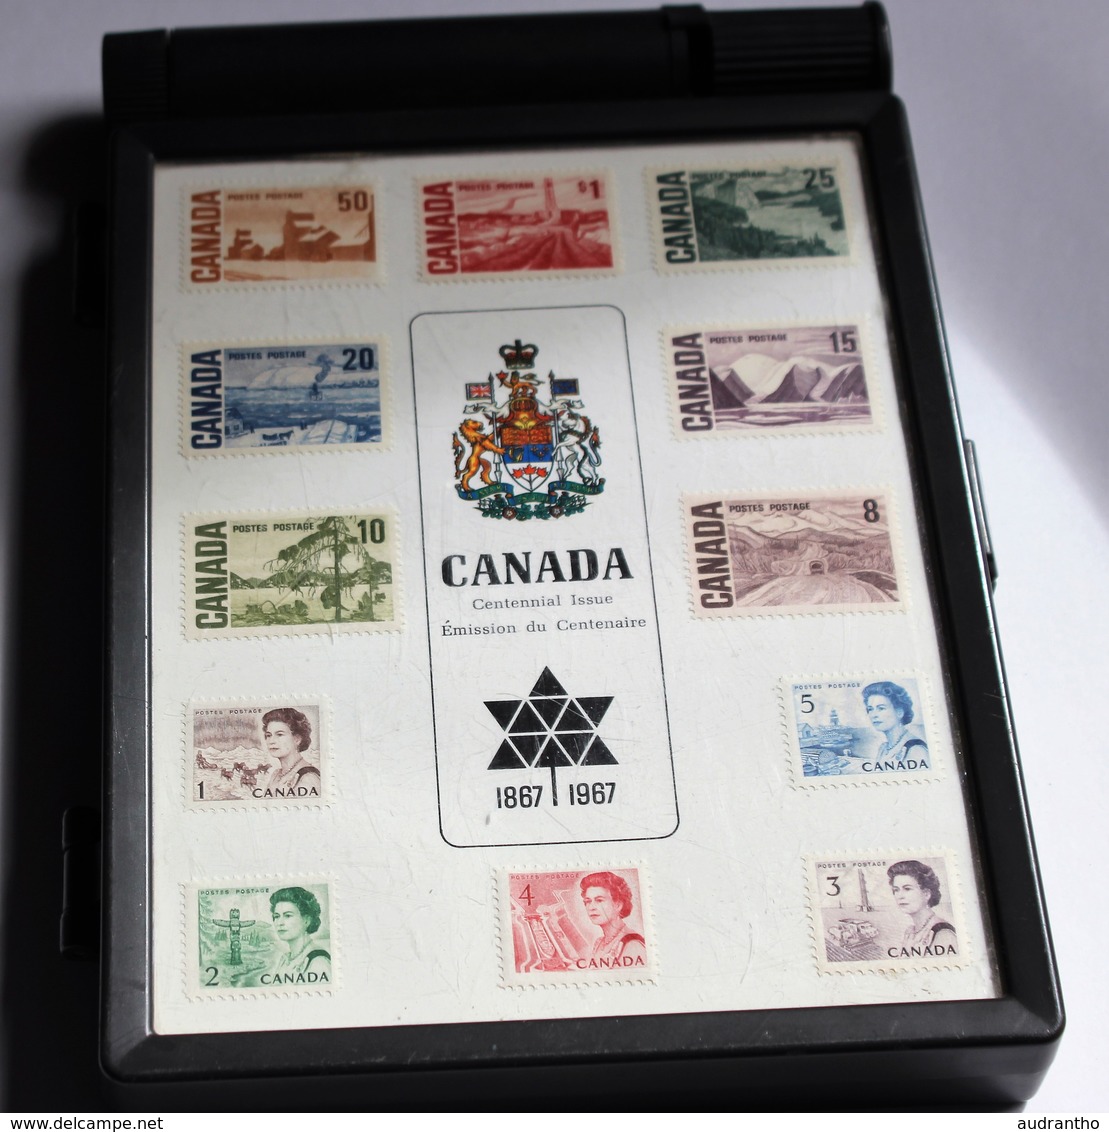 Timbres Canada Centennial Issue Emission Du Centenaire 1867 1967 Avec Boite By Air Mail Stamp Box - Historia Postale